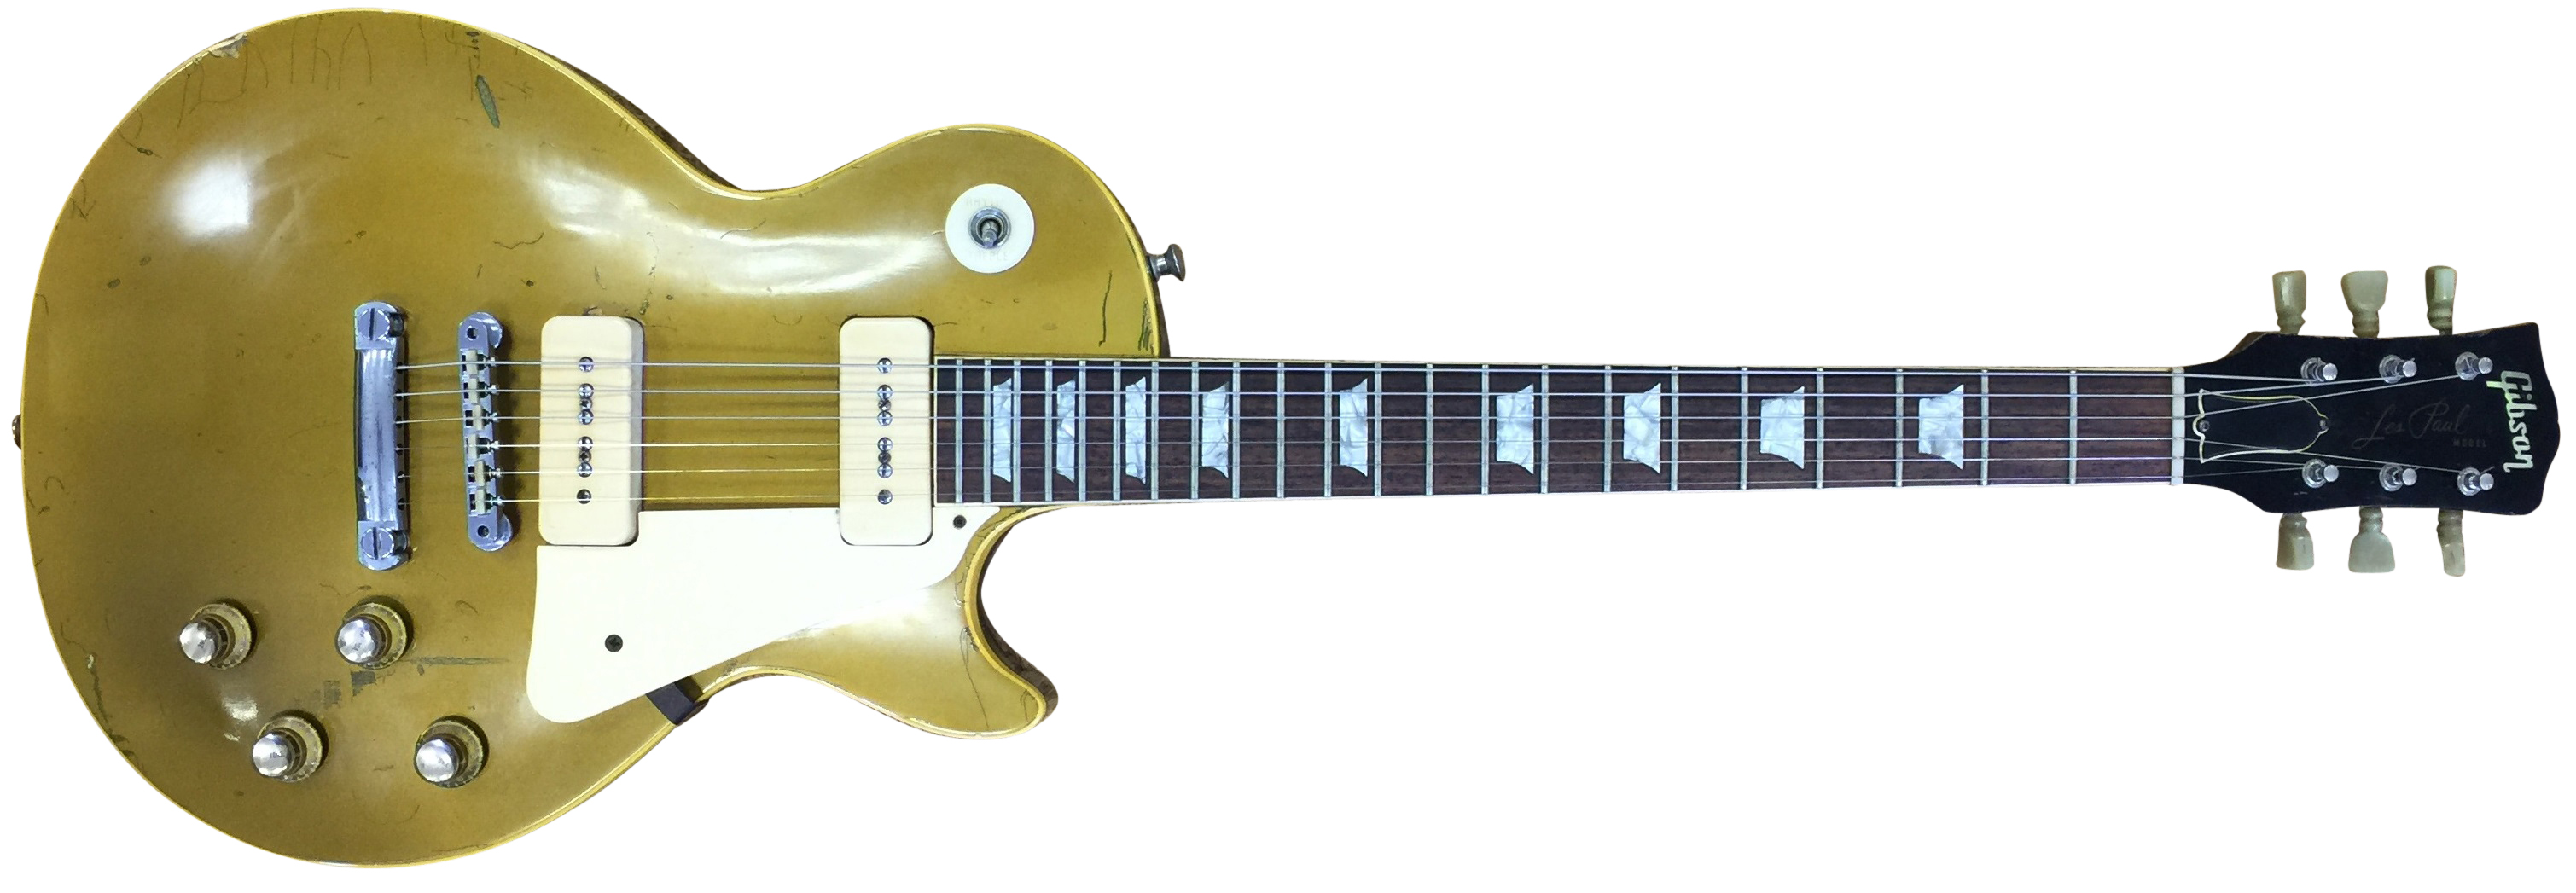 GIBSON LES PAUL GOLDTOP 1969 ELECTRIC GUITAR. With a 59' neck and pickups.